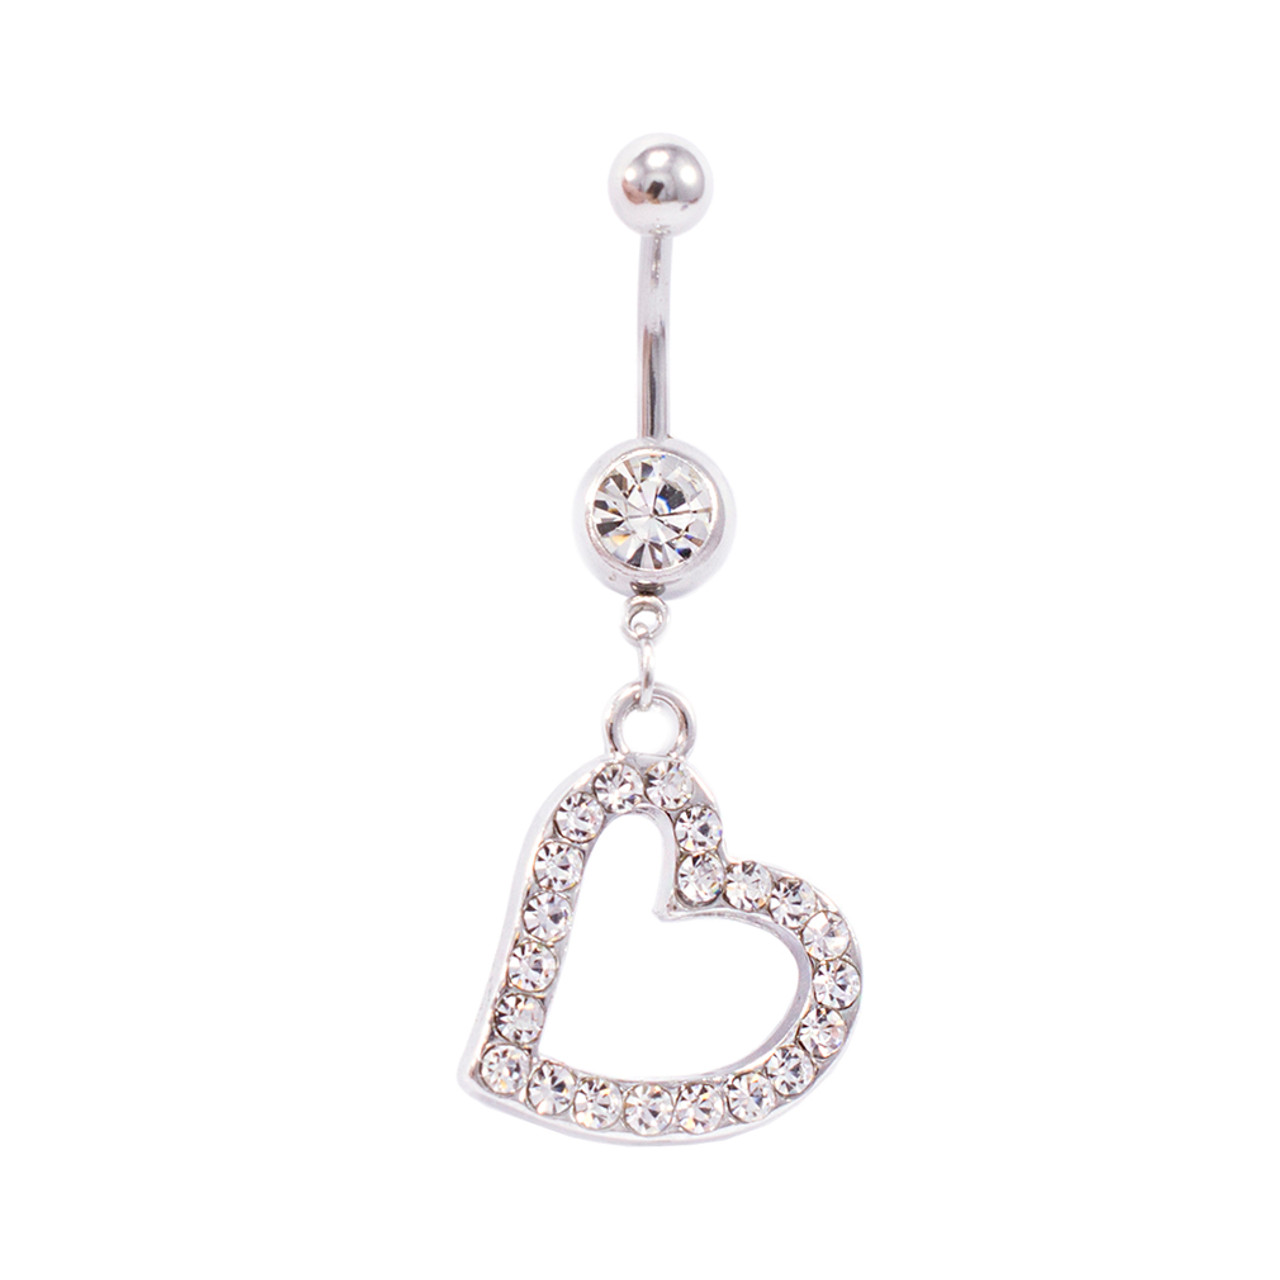 Fast Shipping Fashion Surgical Stainless Steel Cute Heart Nipple Rings Ring  With Clear Cz Zircon Stones Piercing Jewelry - Buy Nipple Rings,Cute